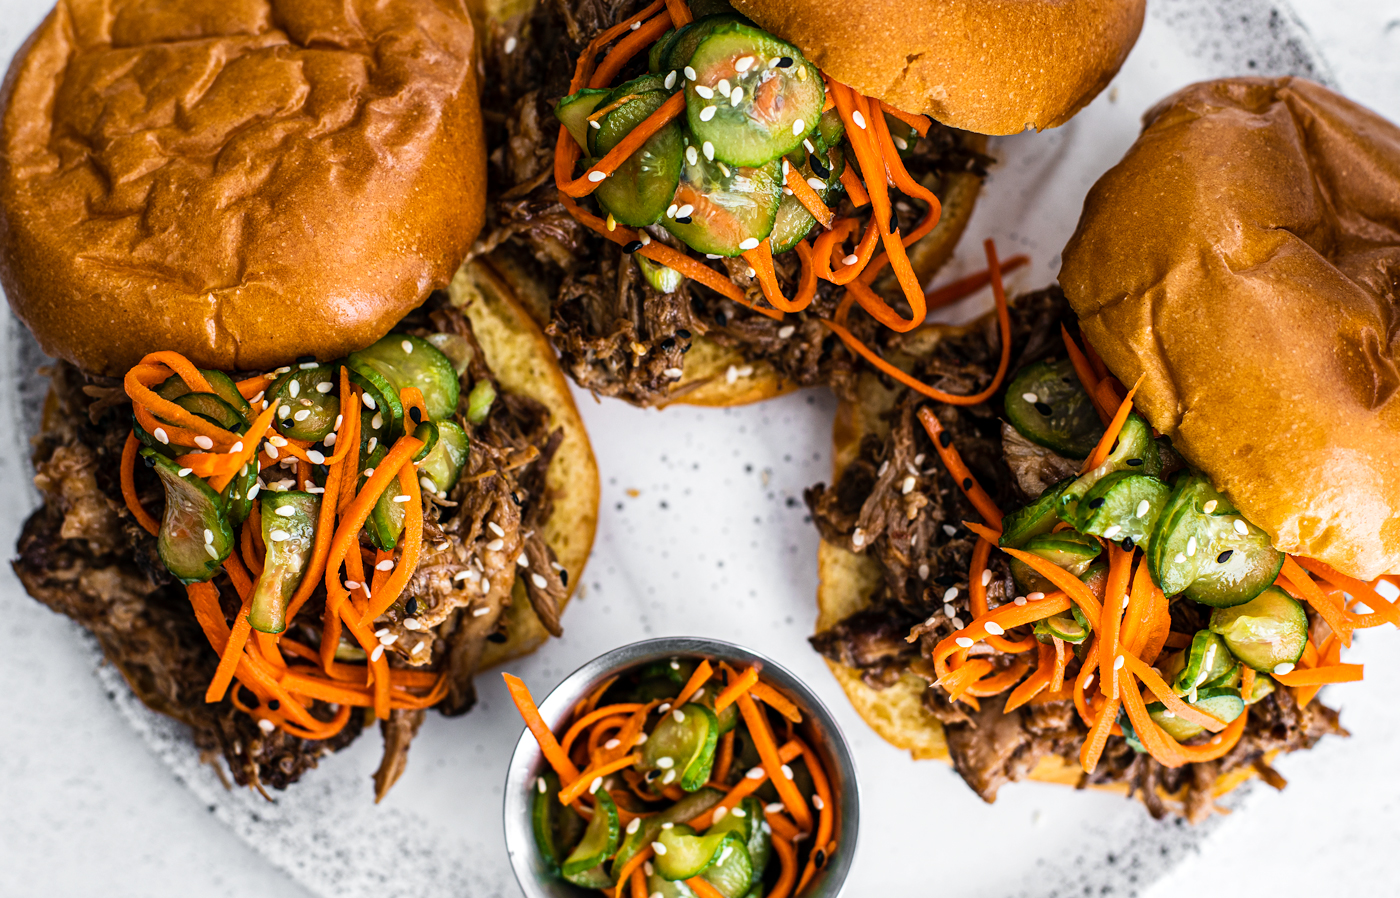 Serving plate with pulled pork sandwiches topped with pickled cucumbers and carrots.